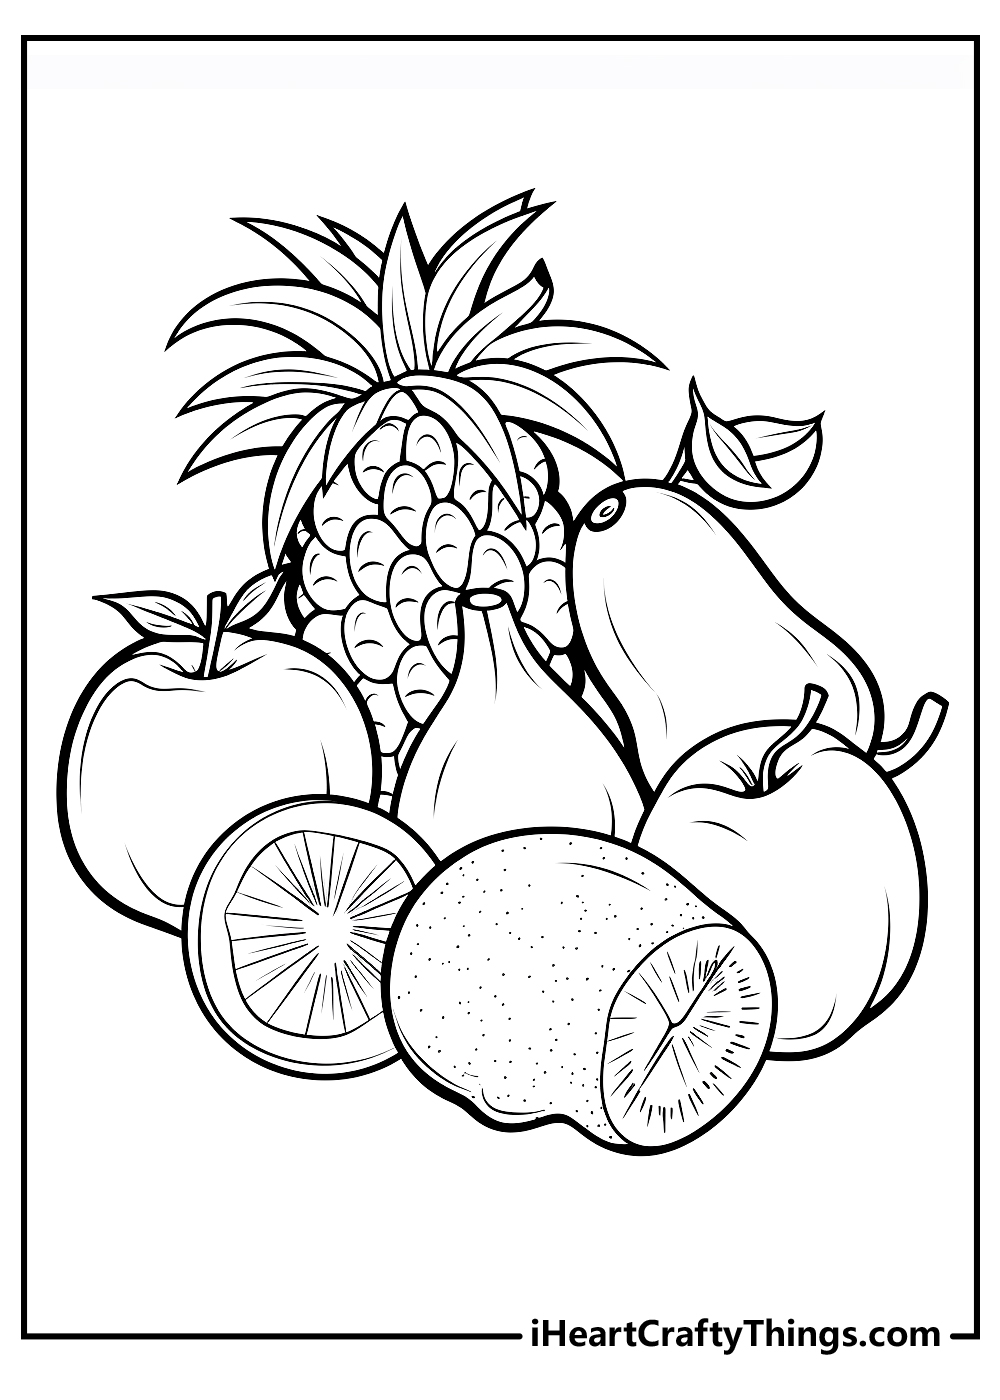 Castle Arts | Over 70 Free Colouring Pages! – Page 4 – Castle Arts USA